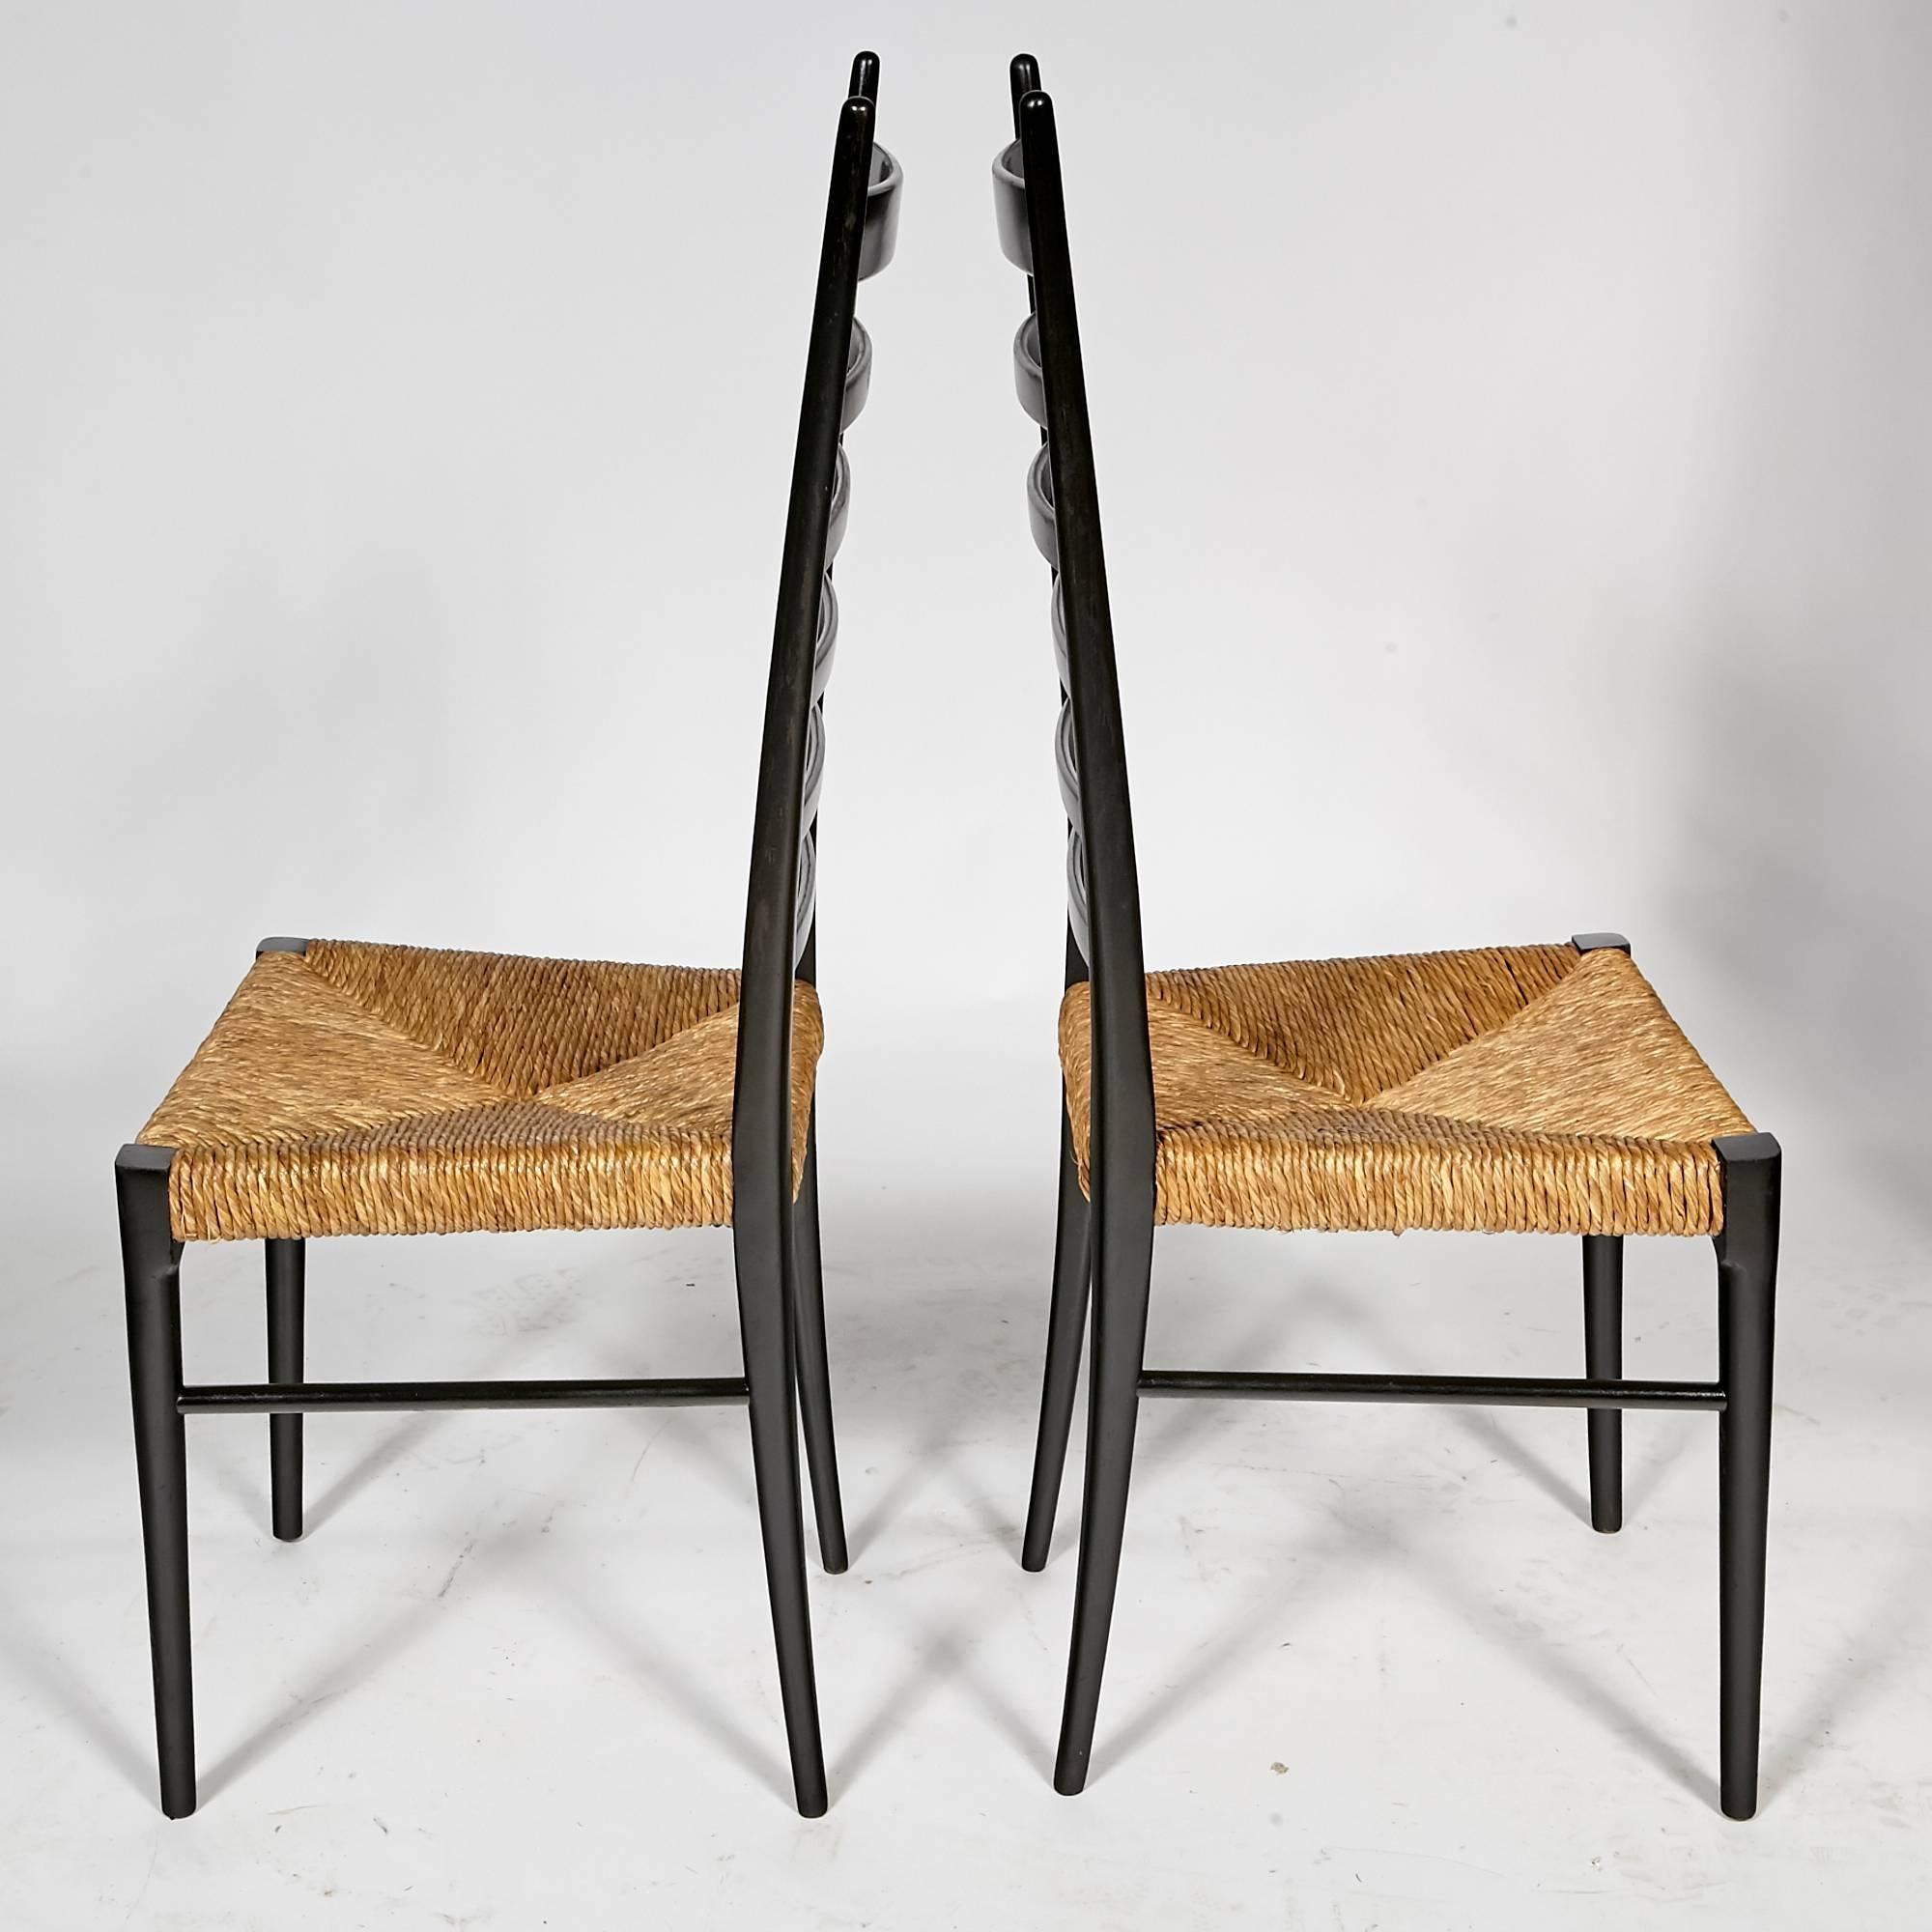 20th Century Gio Ponti Ladder Back Chairs, 1950s For Sale